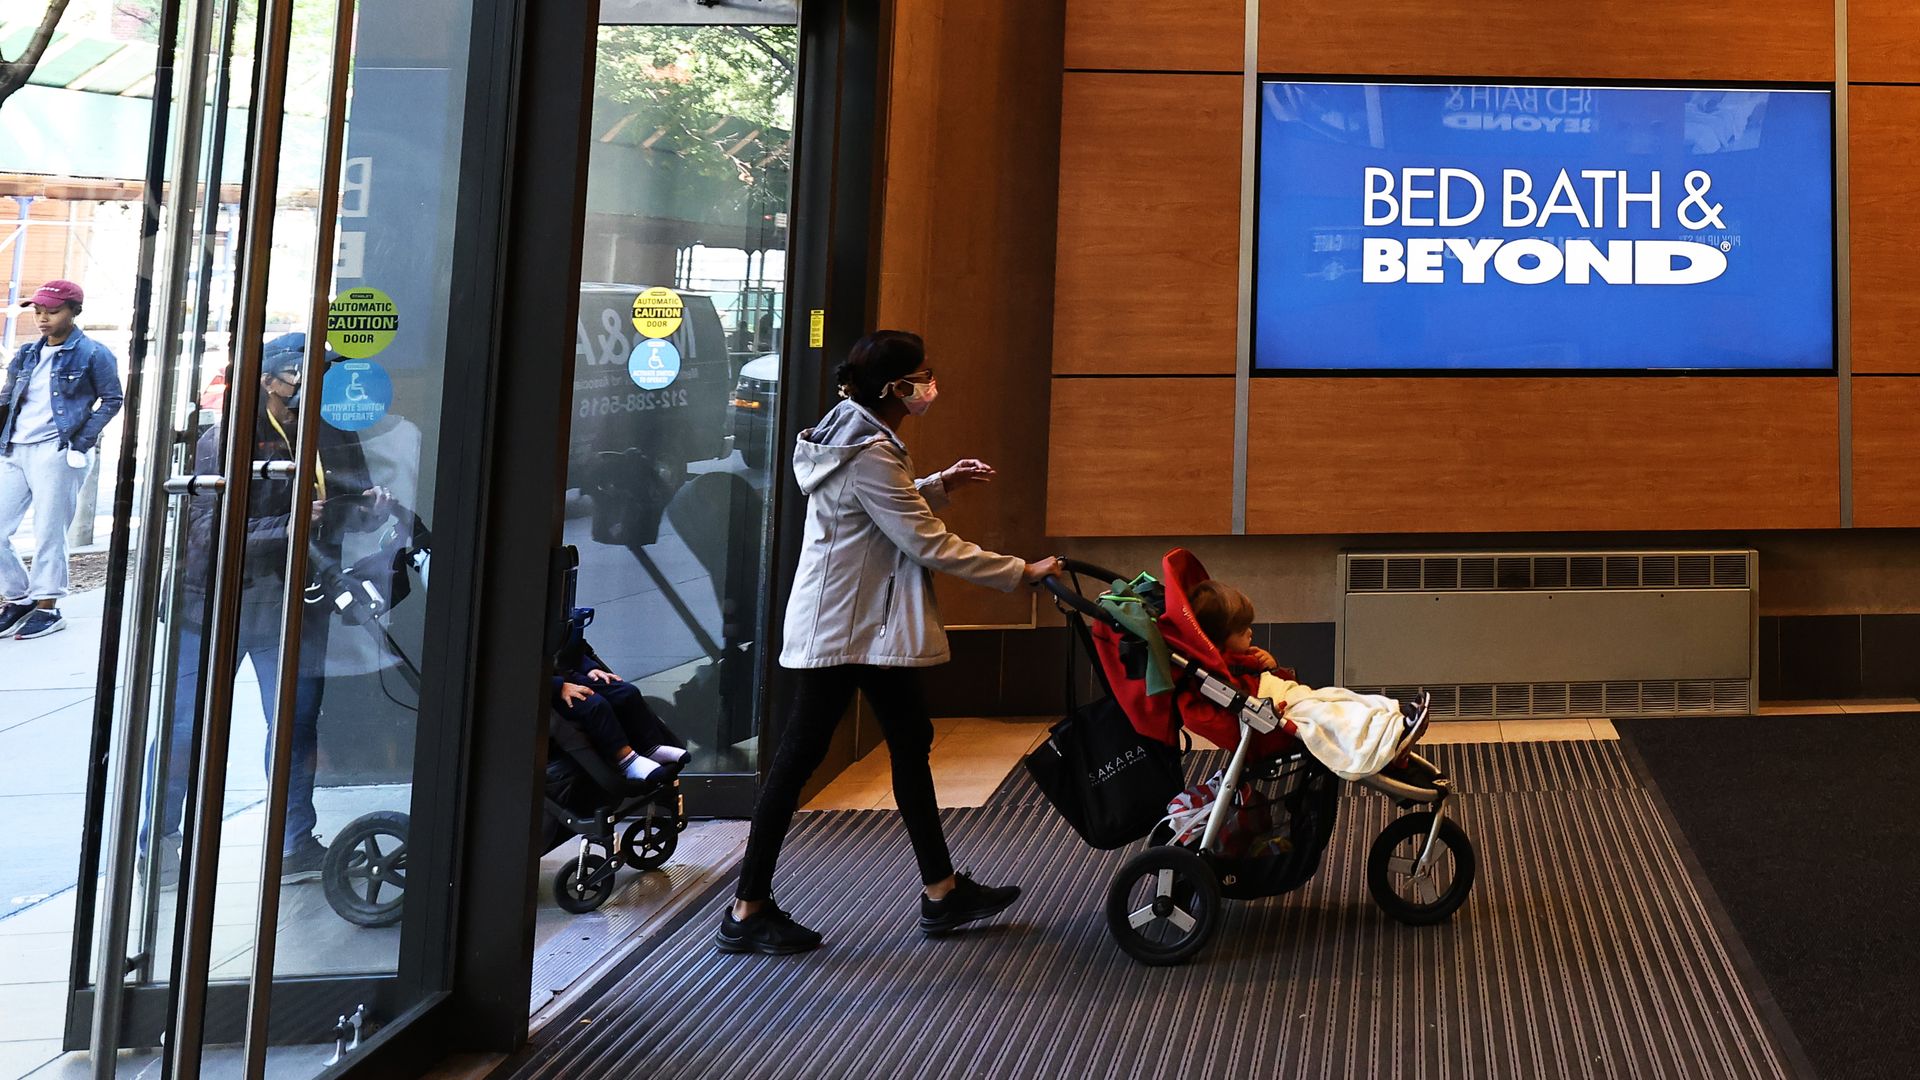 A woman in a tan-colored hooded jacket and black leggings pushes a child in a black baby stroller past a video screen that features the Bed Bath & Beyond name in white lettering on a blue backdrop.